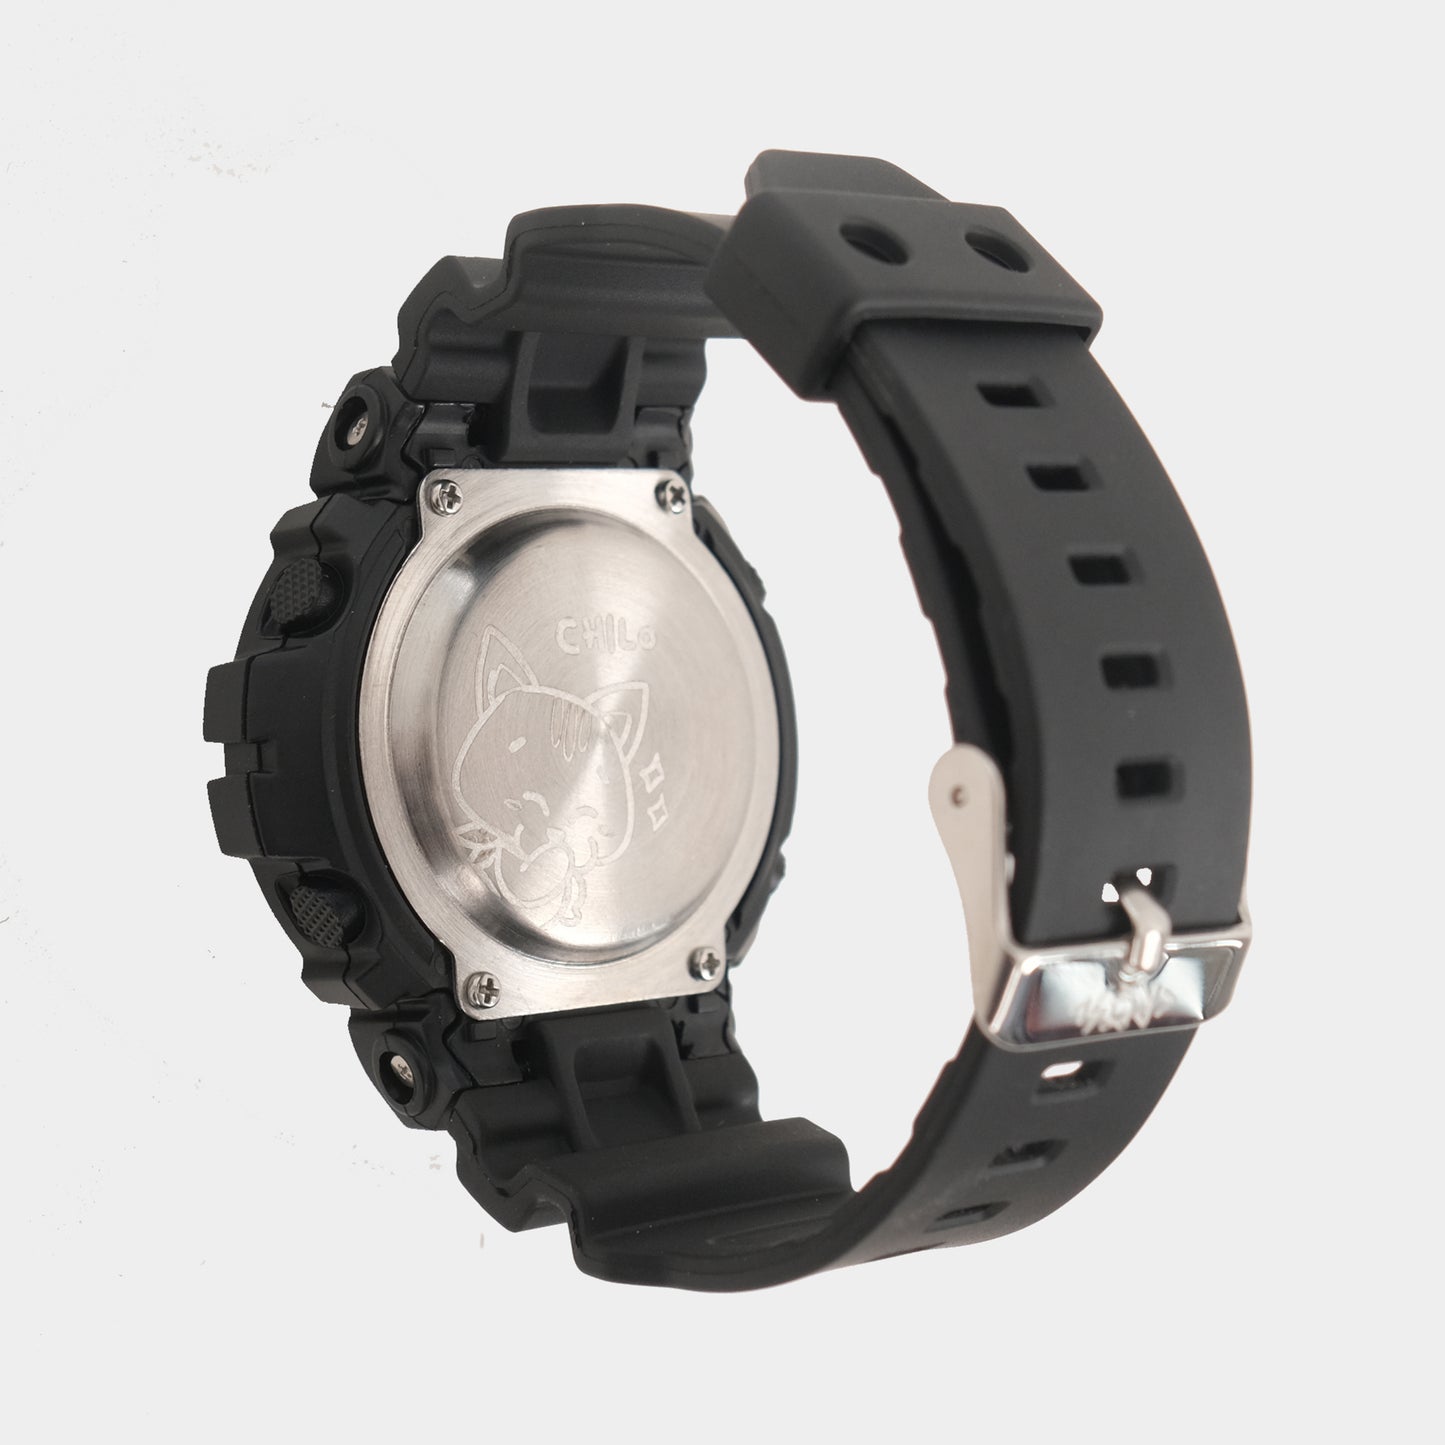 Chilo Bumble Watch